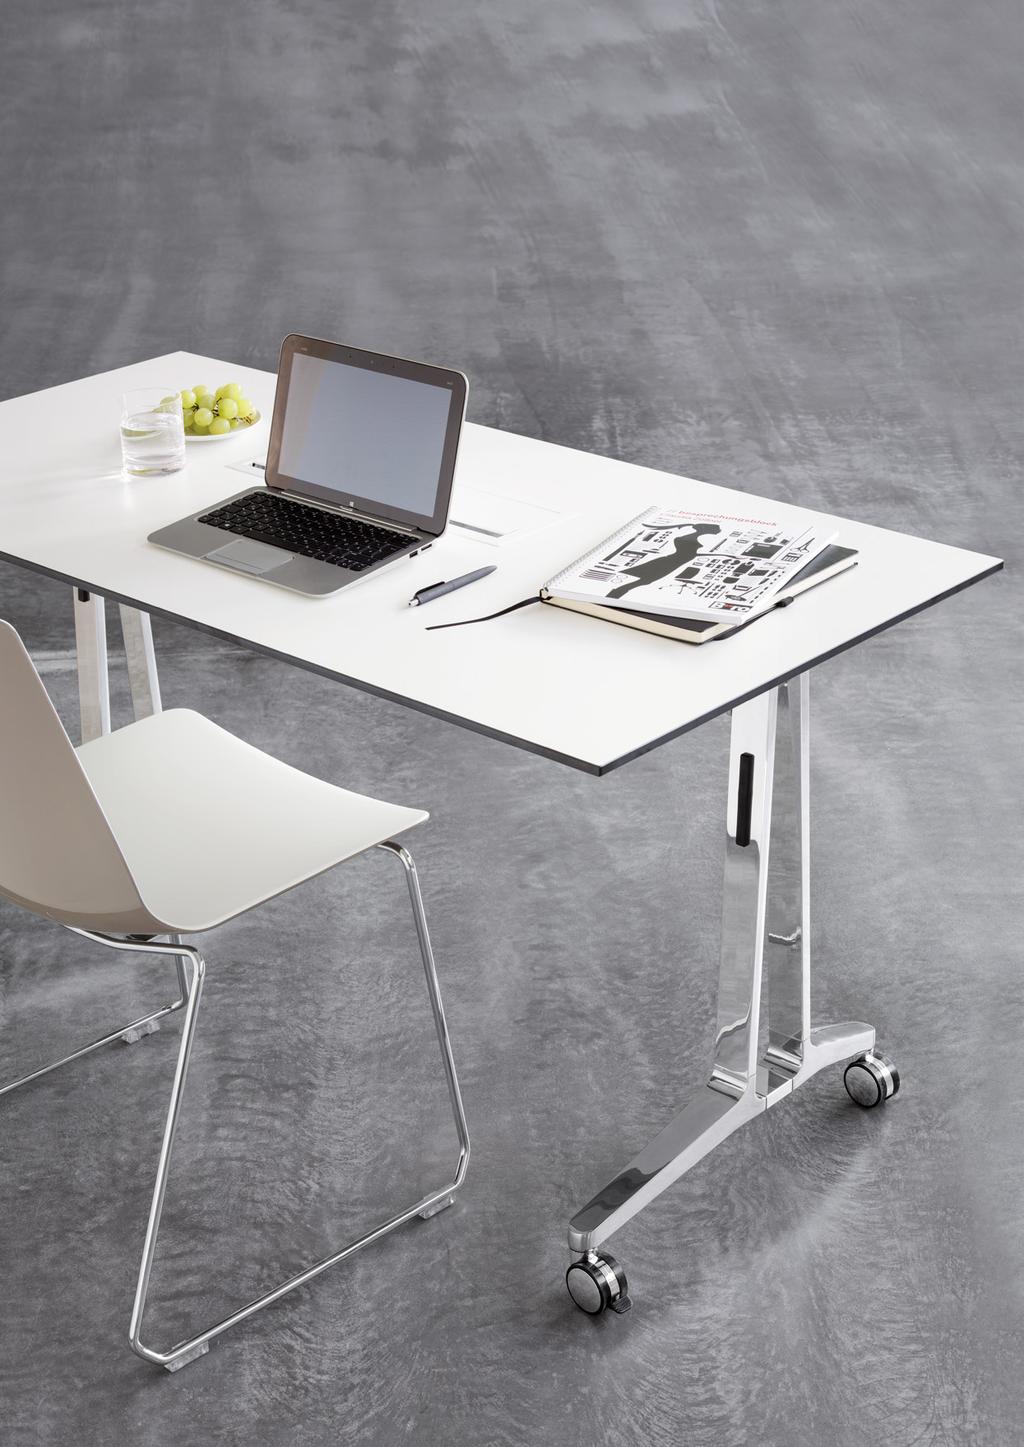 Tables that are not needed can be flipped up and compactly nested to save space.